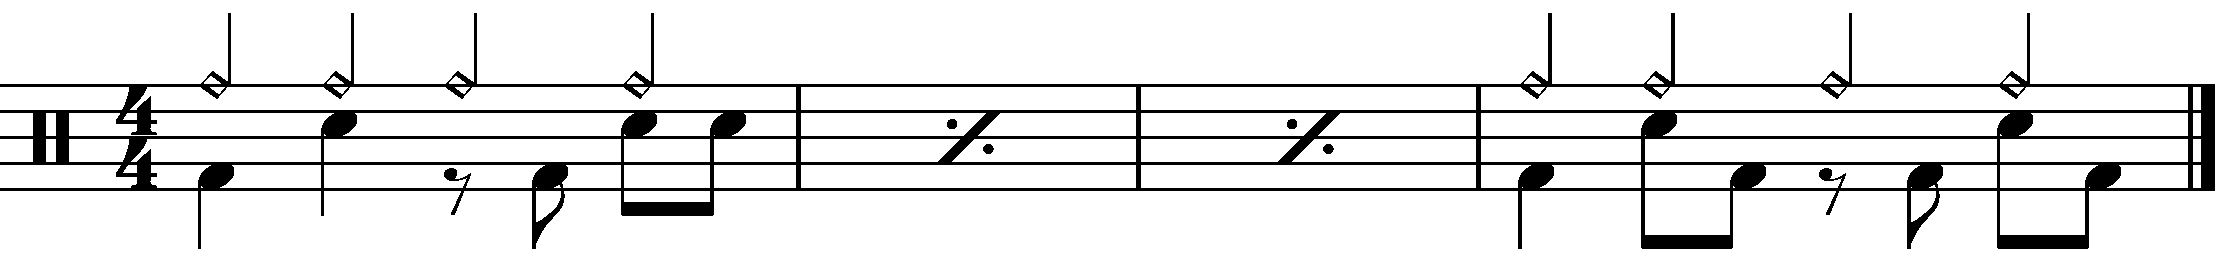 An A A A B example with a groove based fill